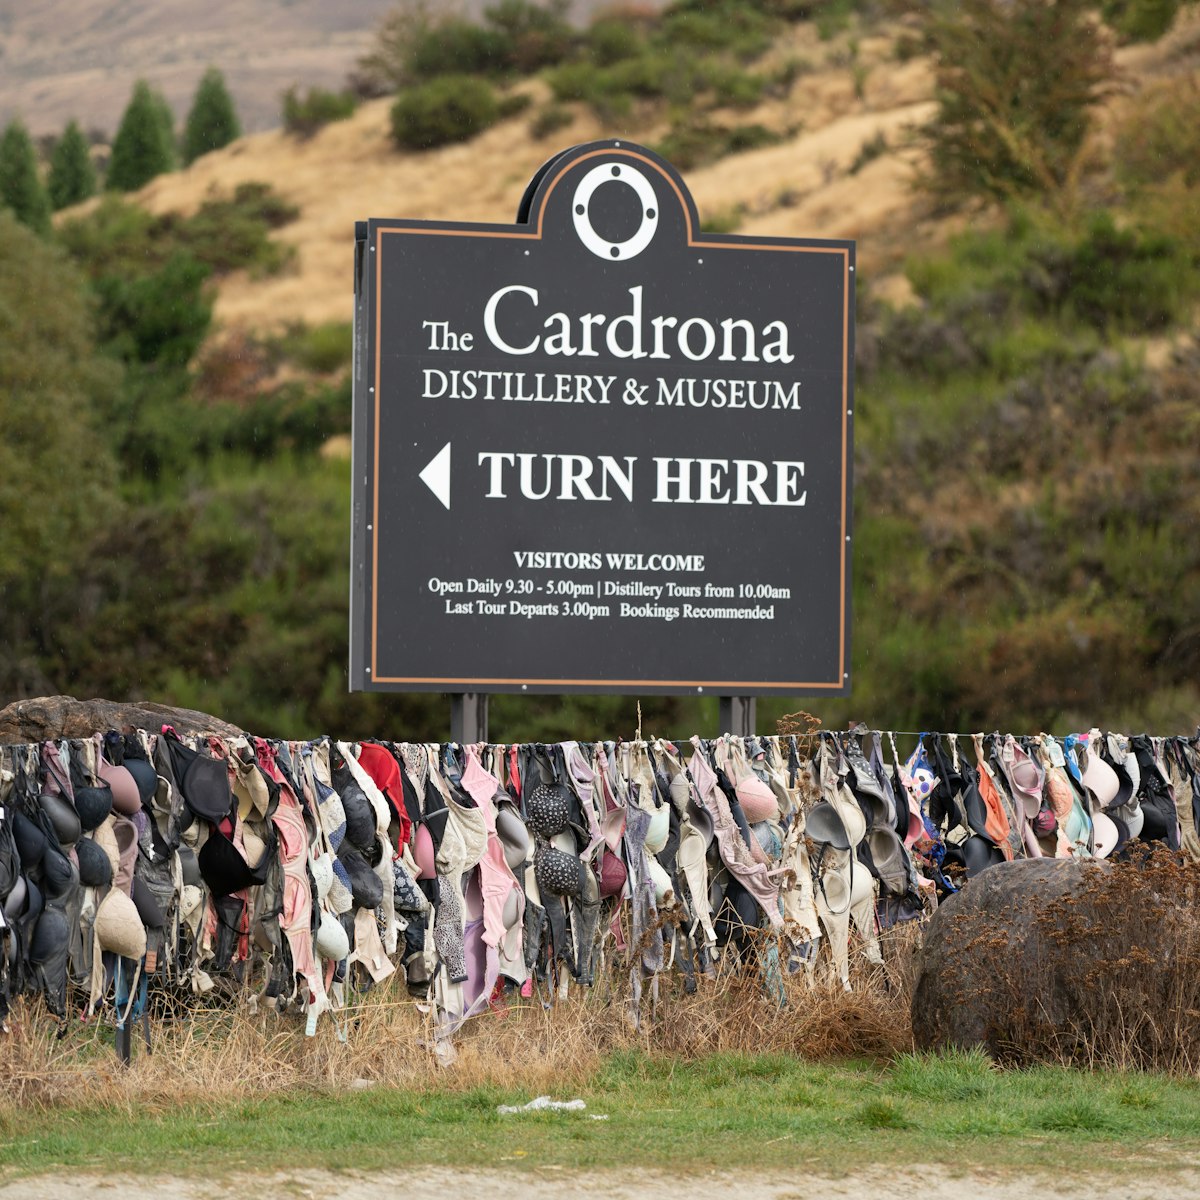 The Cardrona Distillery and Museum sign board with hundreds of bras hanging on the fence known as Bradrona.